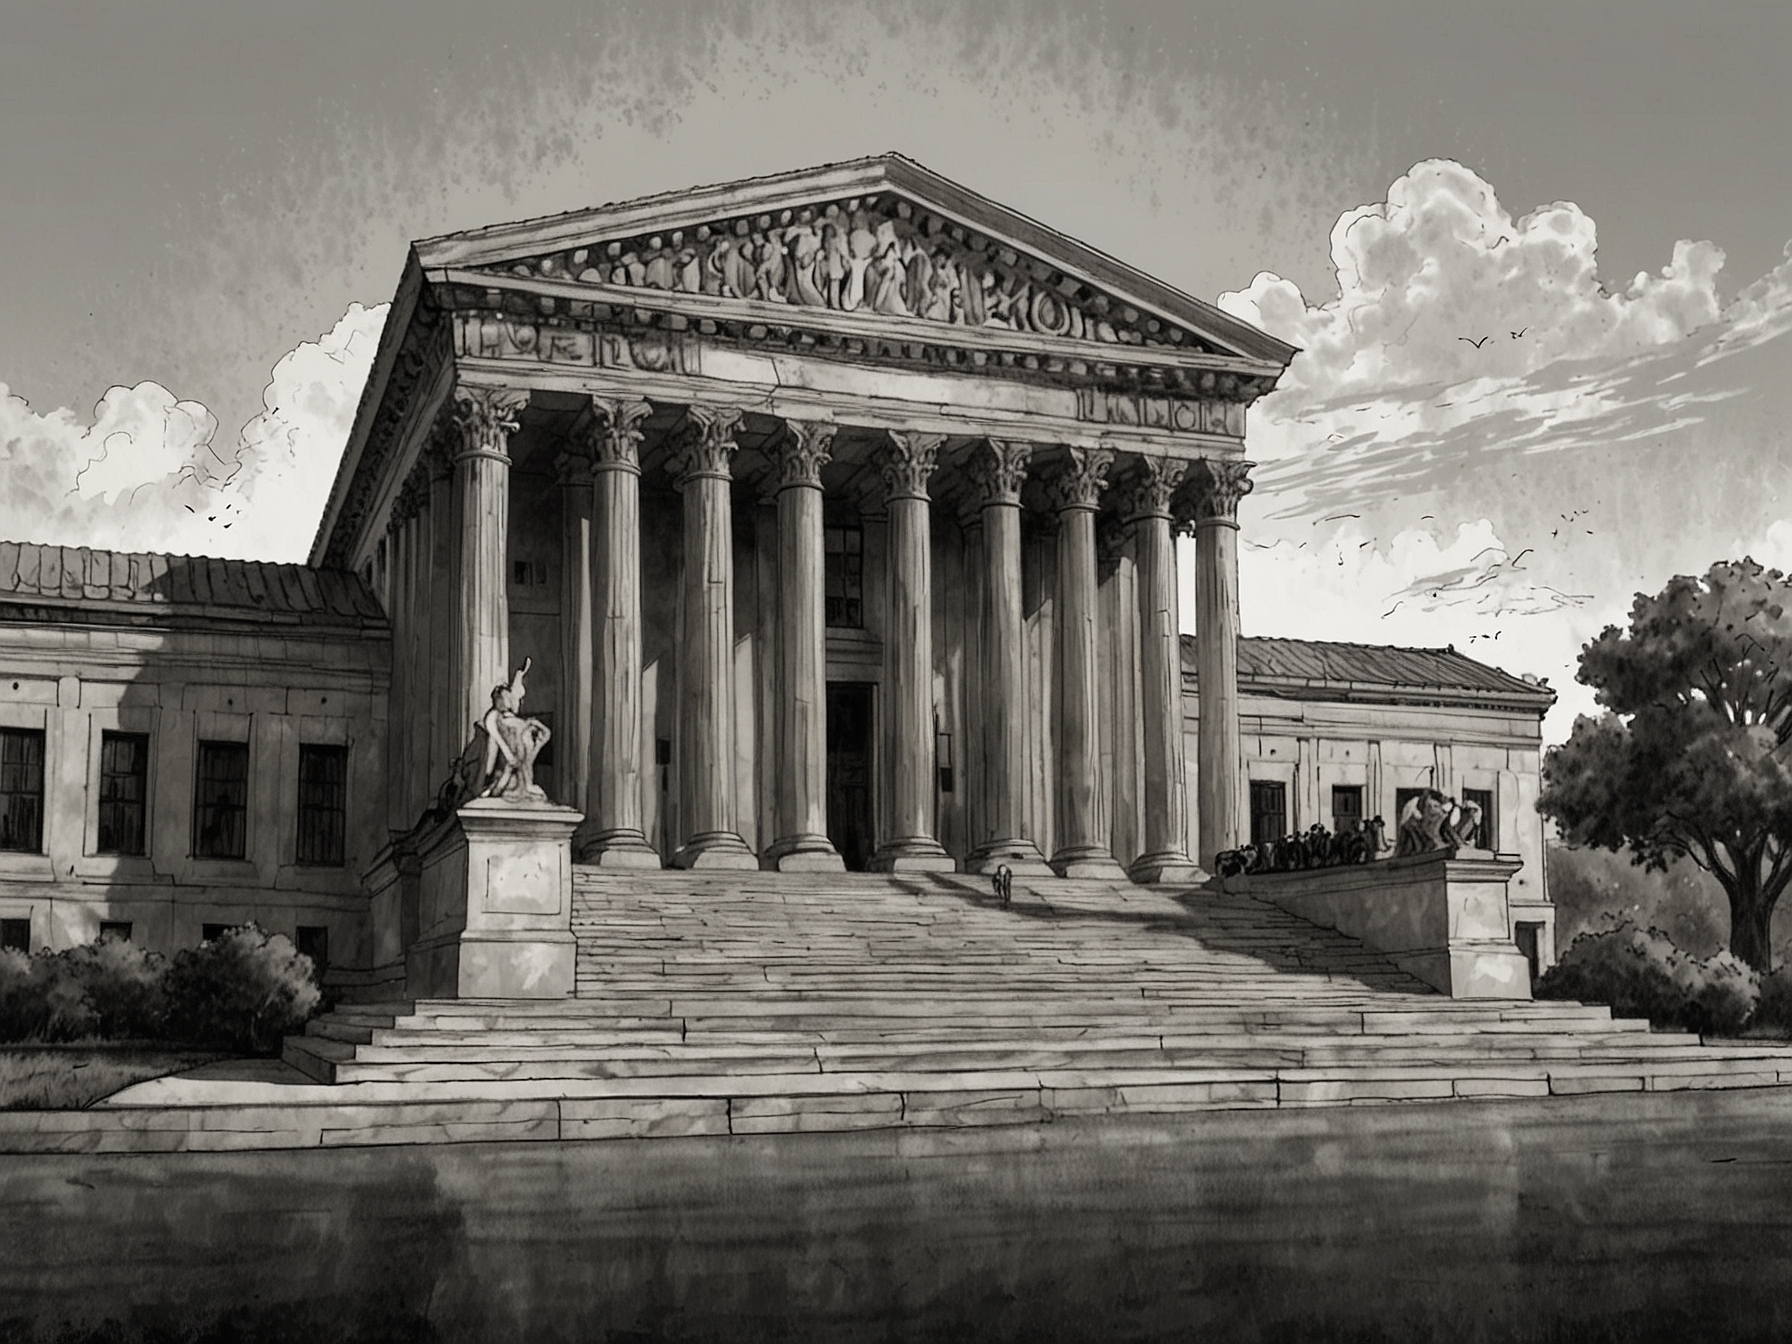 An illustration of the Supreme Court building with symbolic scales of justice, highlighting the complex legal battle over presidential immunity and the divided nature of the decision.